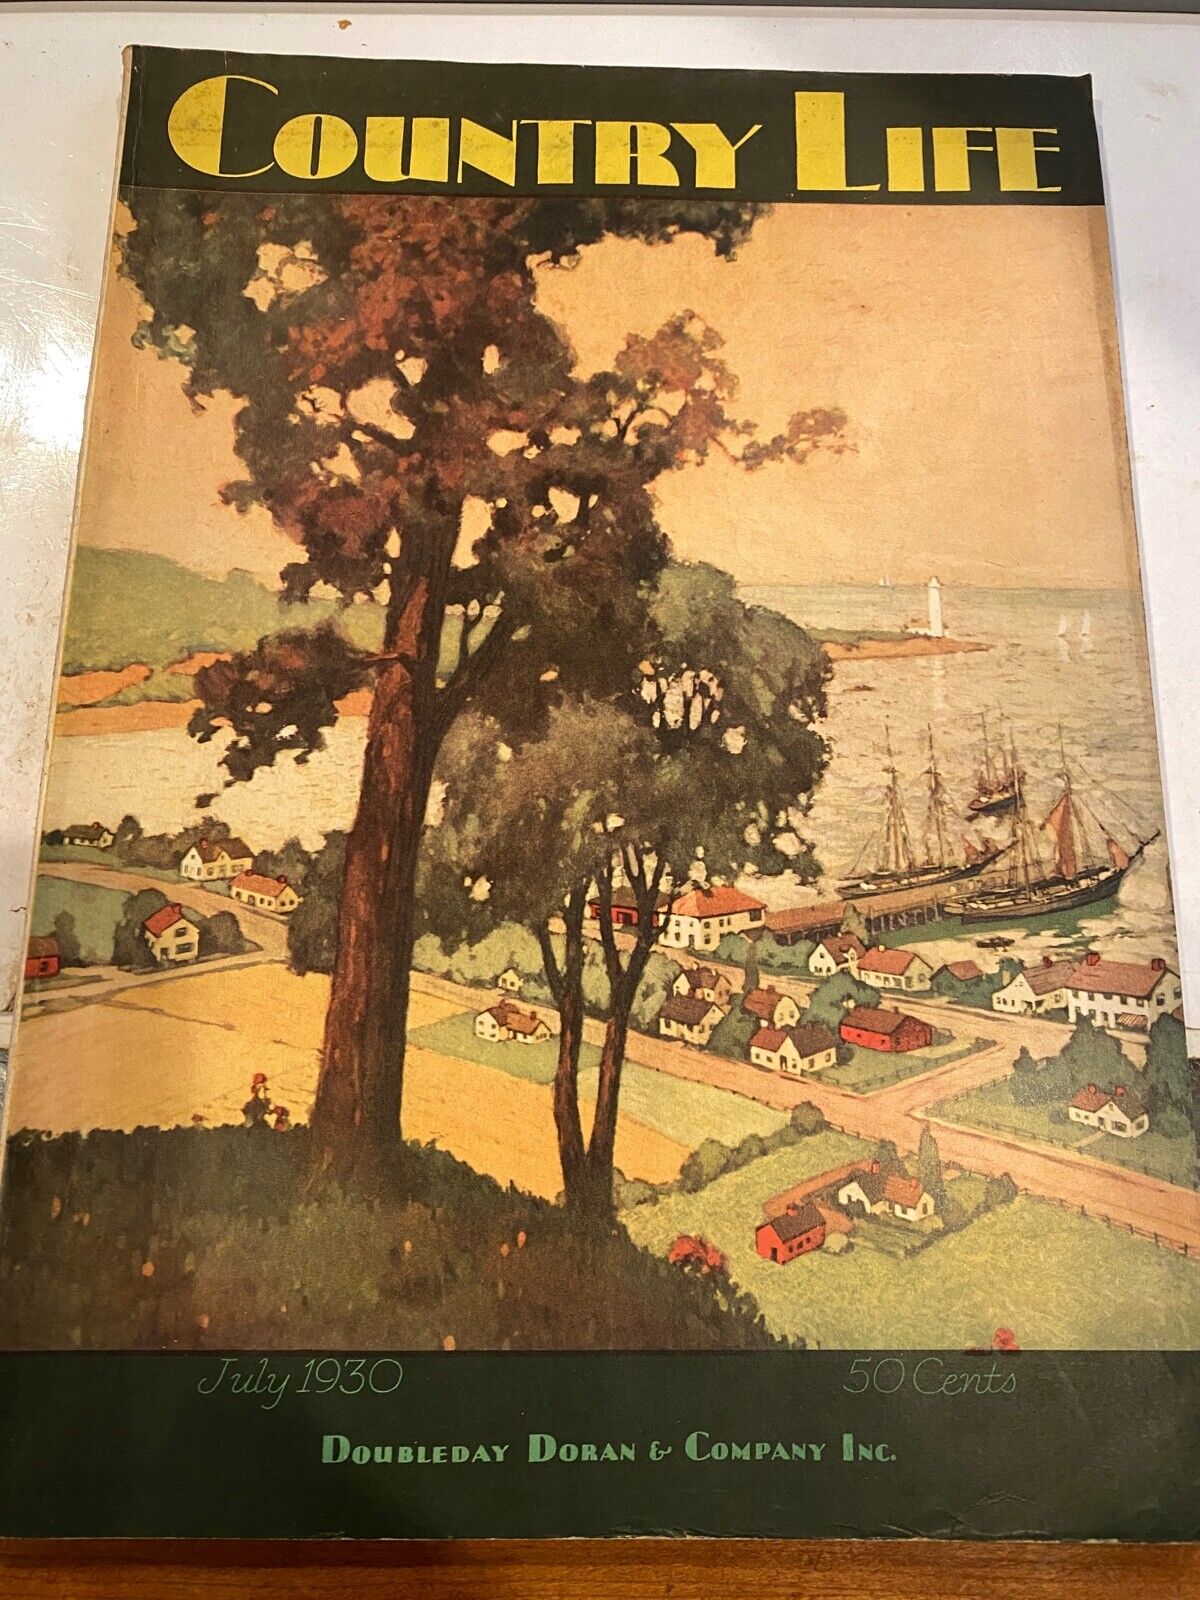 COUNTRY LIFE MAG JULY 1930  VG + great ads